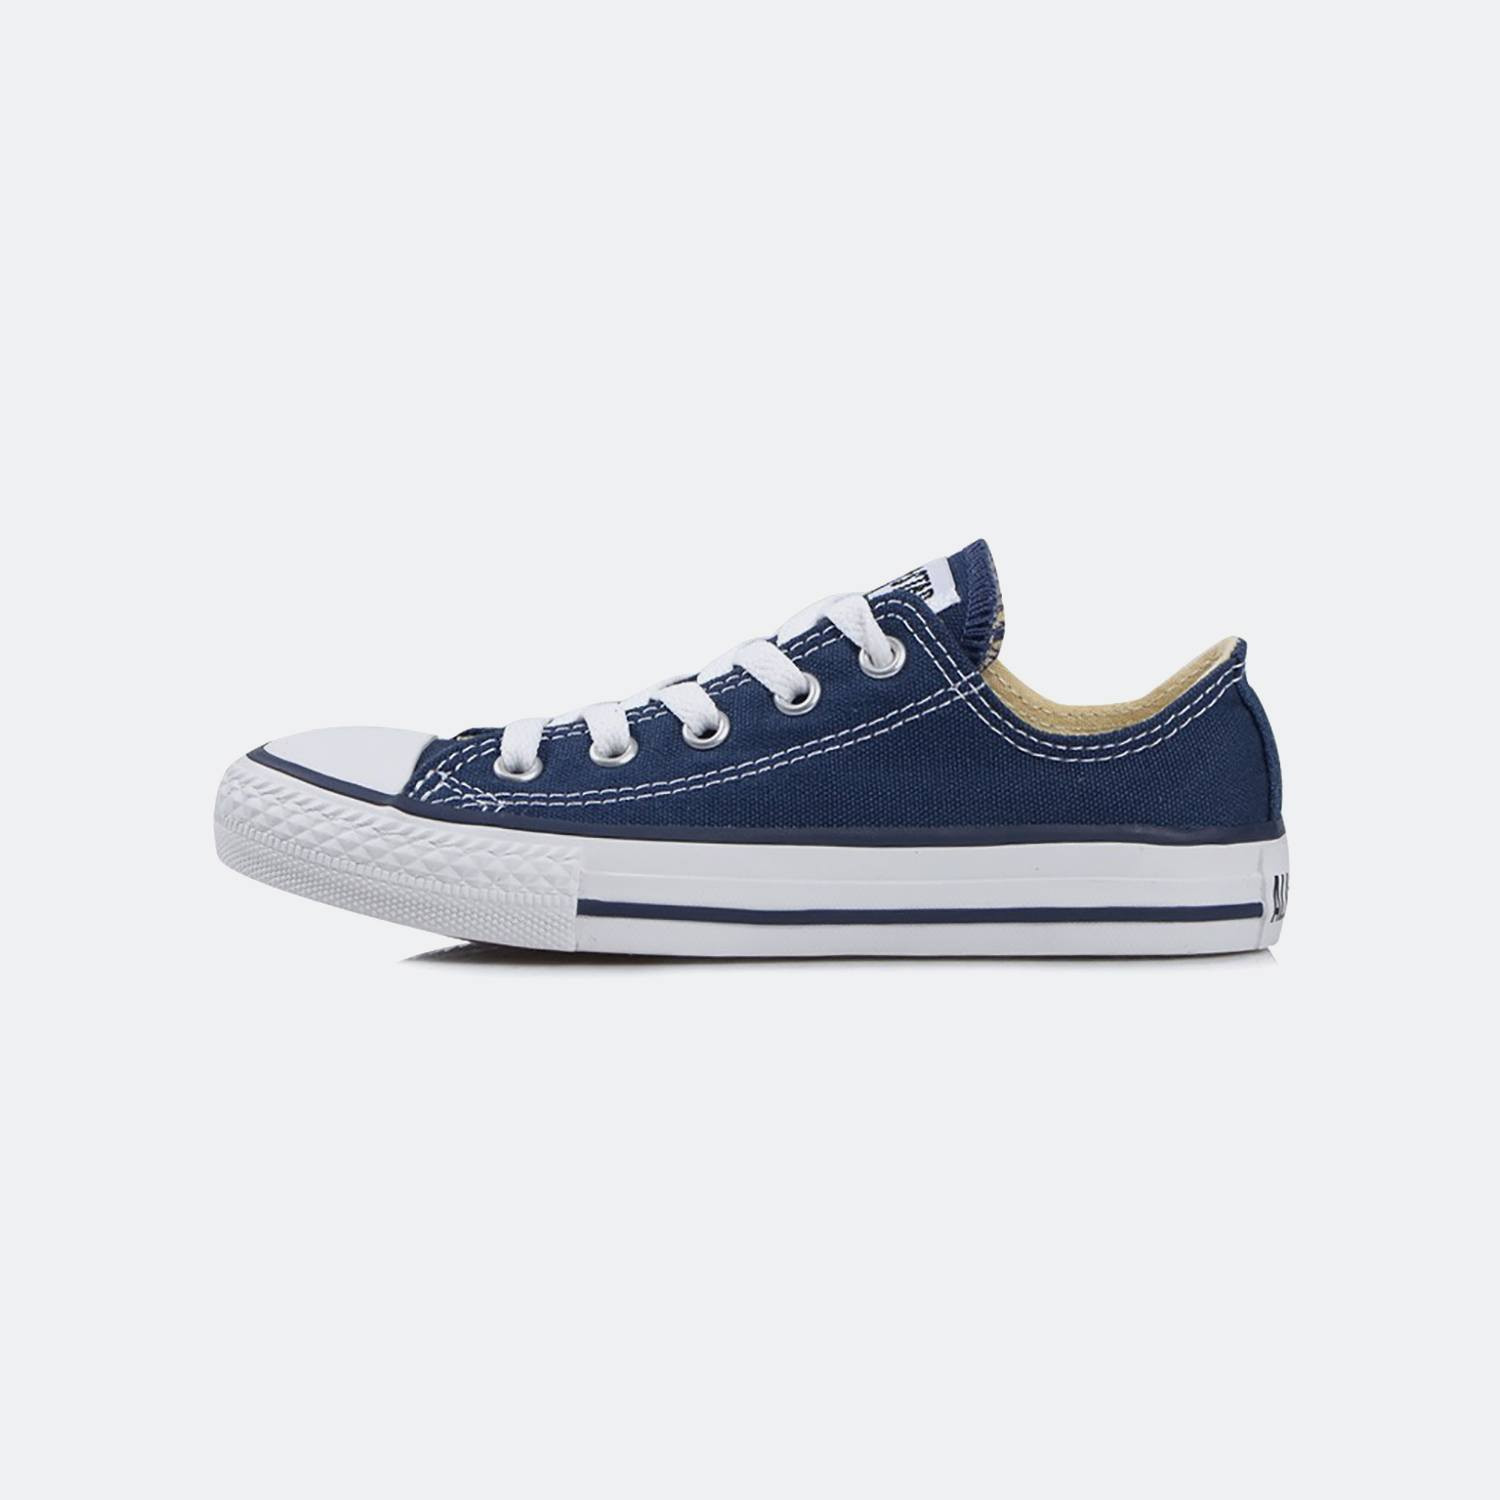 Converse Chuck Taylor All Star Ox Παιδικά Παπούτσια (1080030400_003)